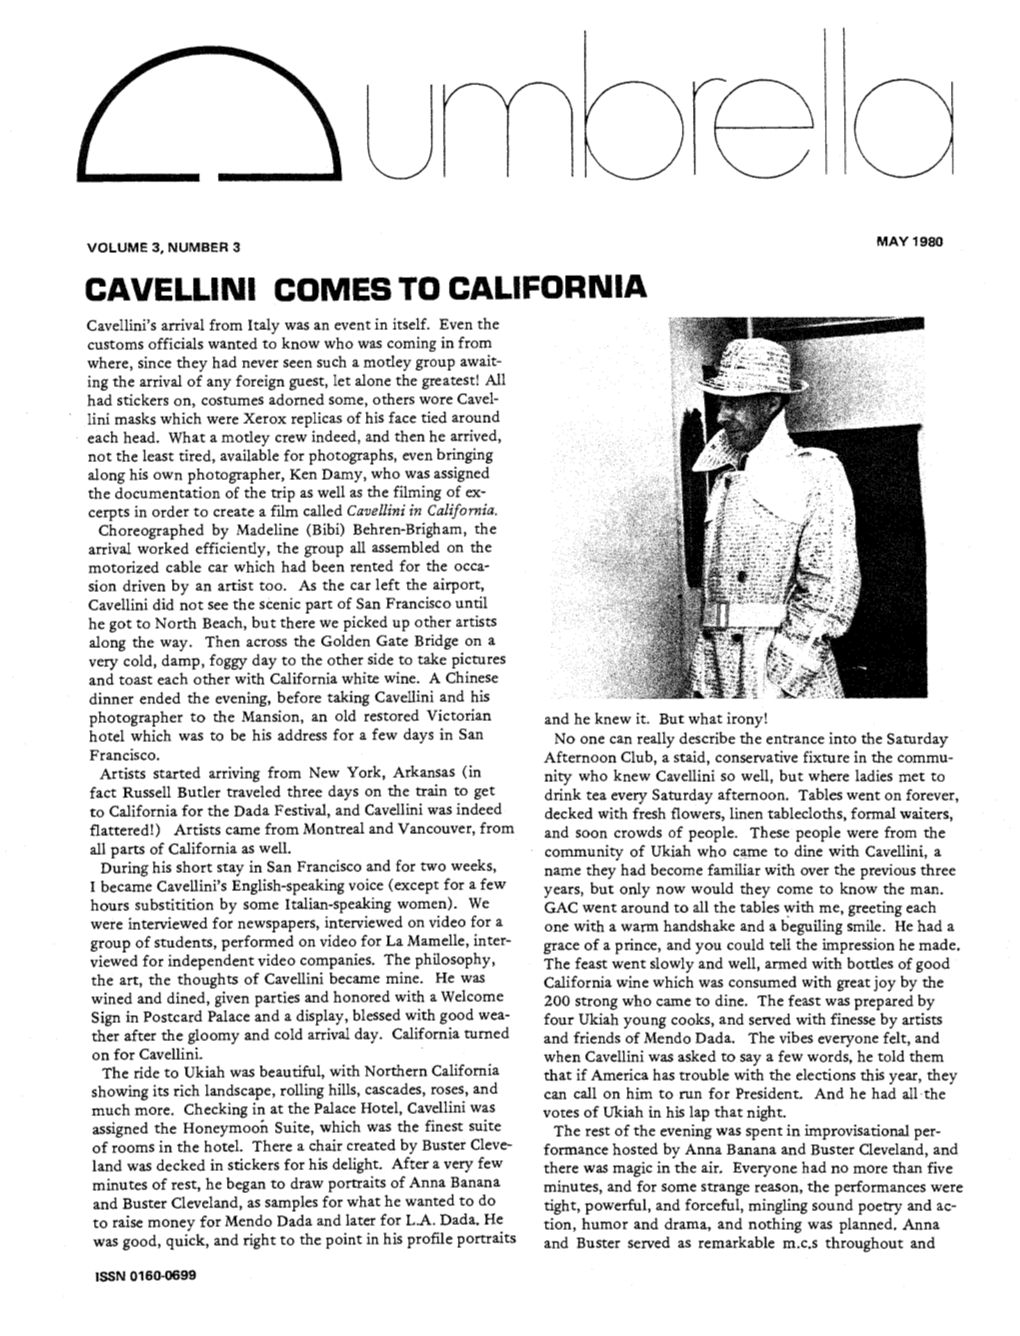 CAVELLINI COMES to CALIFORNIA Cavellini's Arrival from Italy Was an Event in Itself